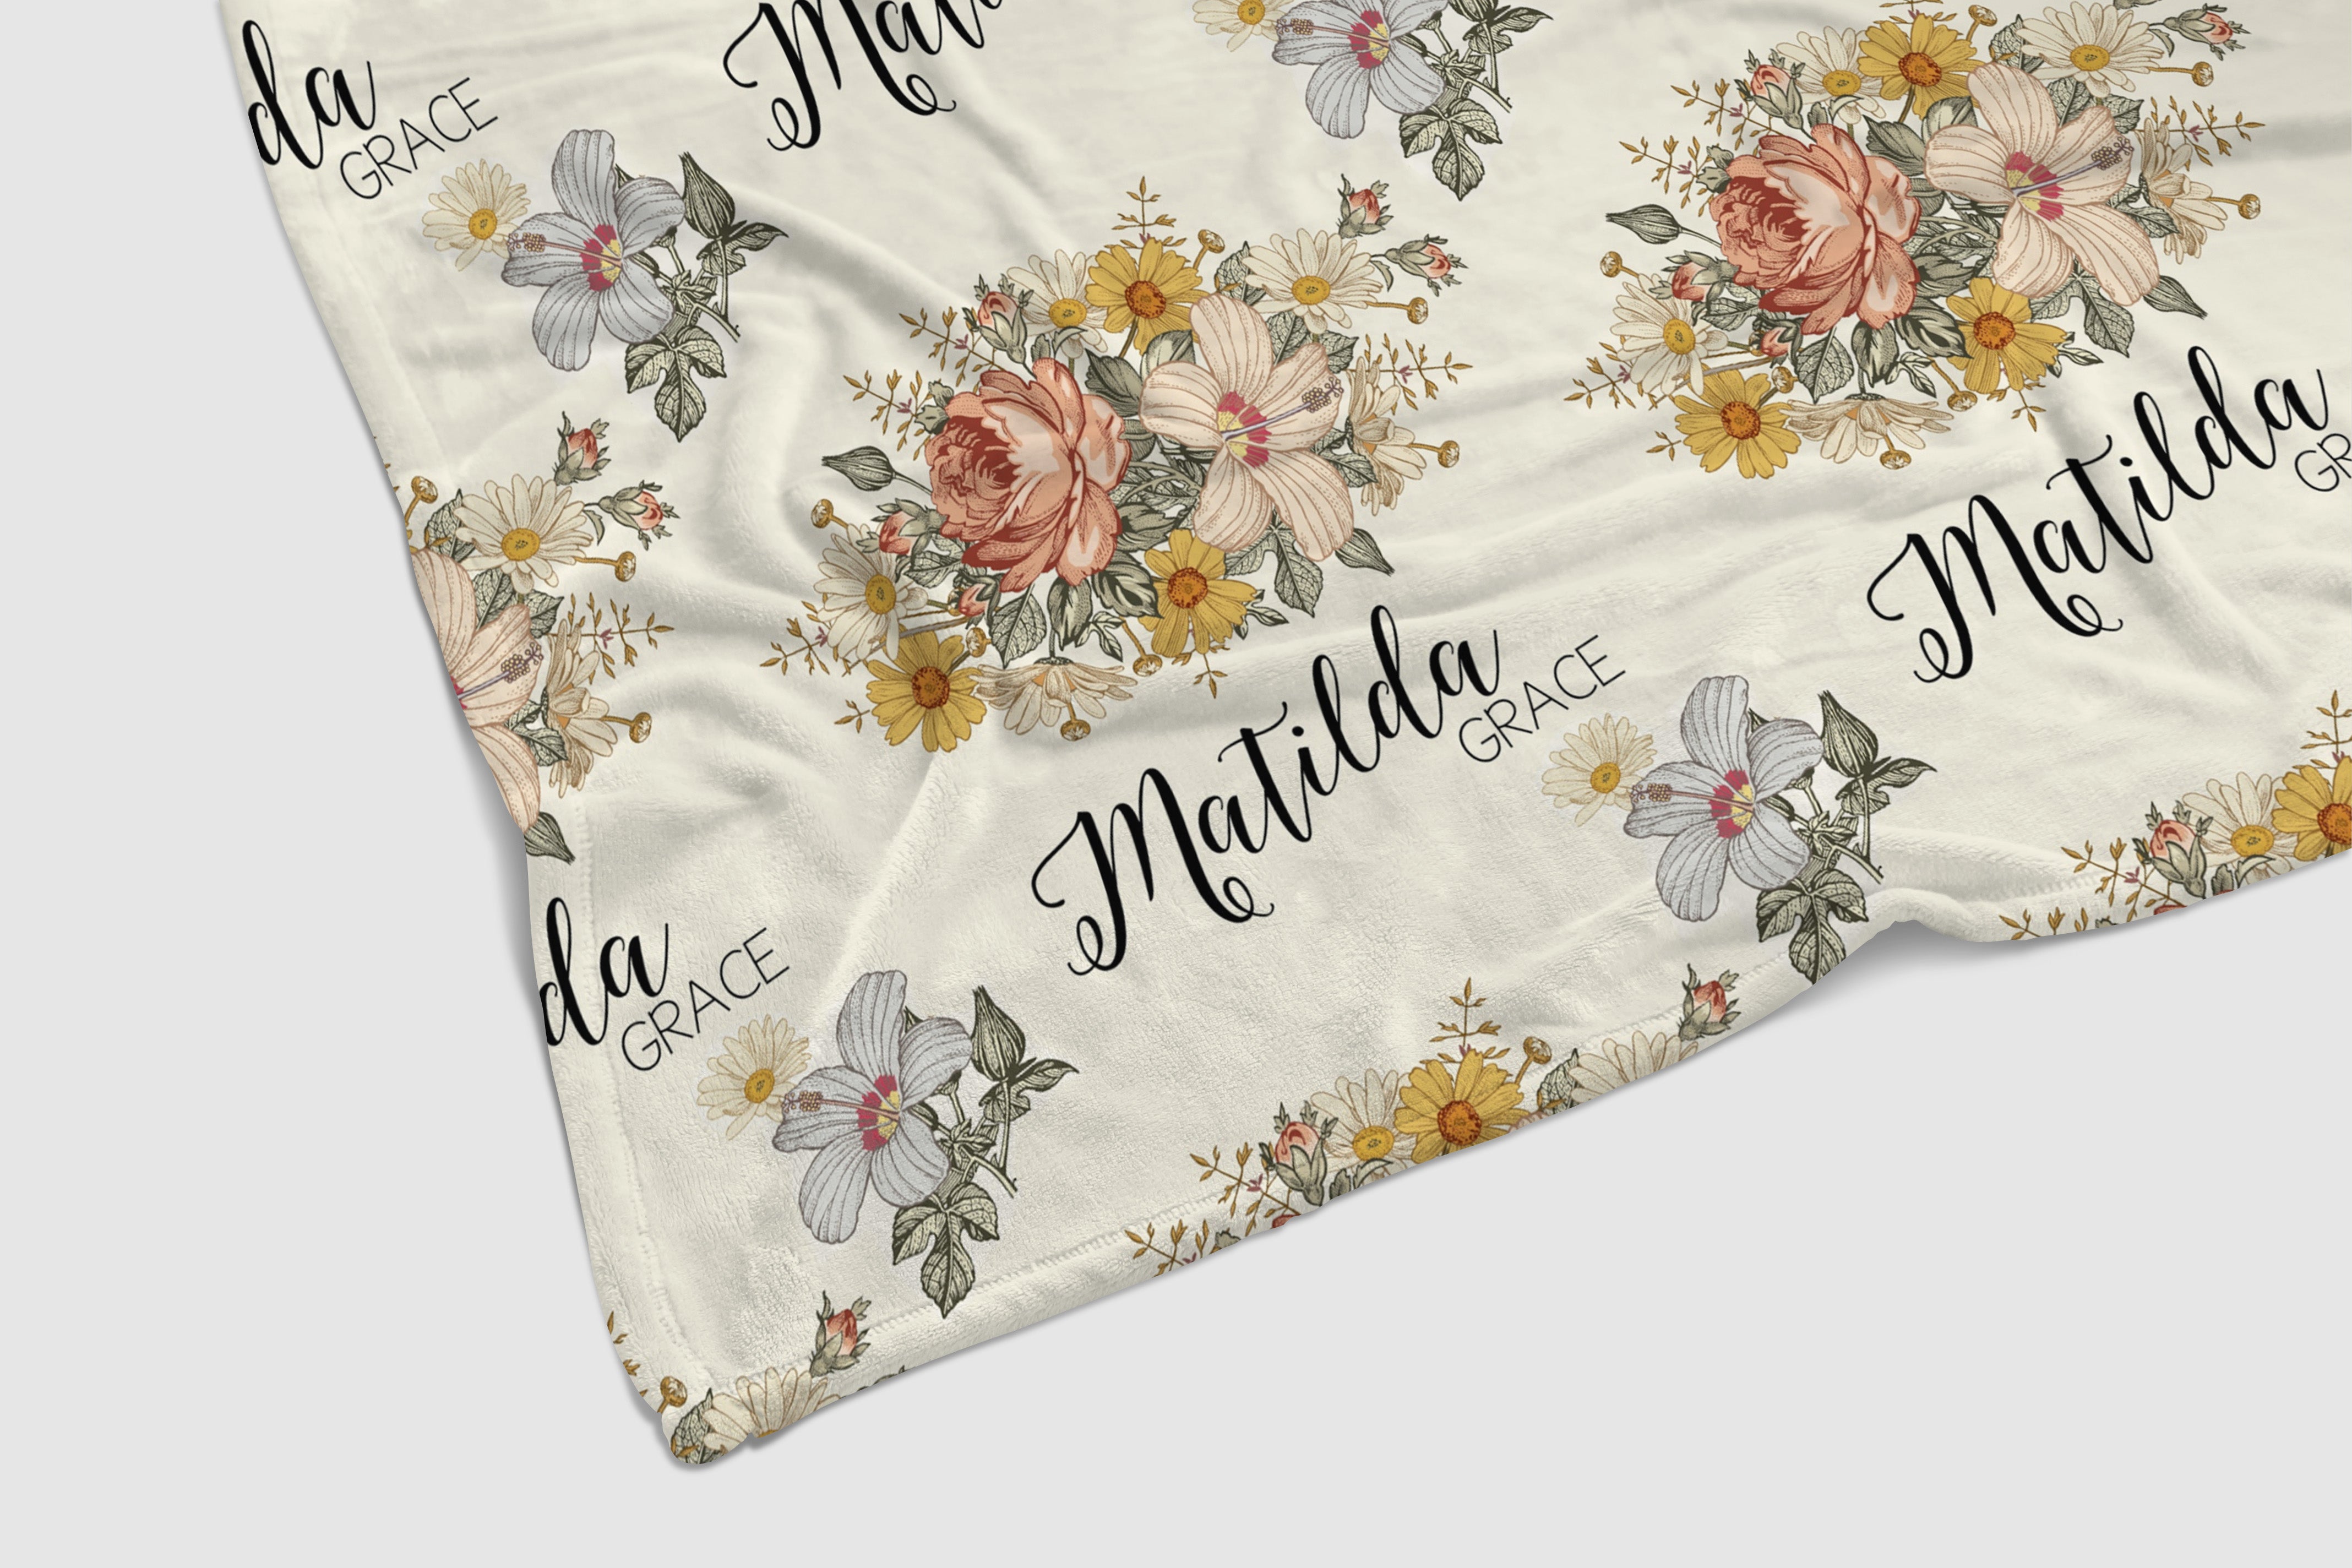 Vintage Earthy Floral Personalized Baby Blanket - gender_girl, Personalized_Yes, Pink and Navy Petals